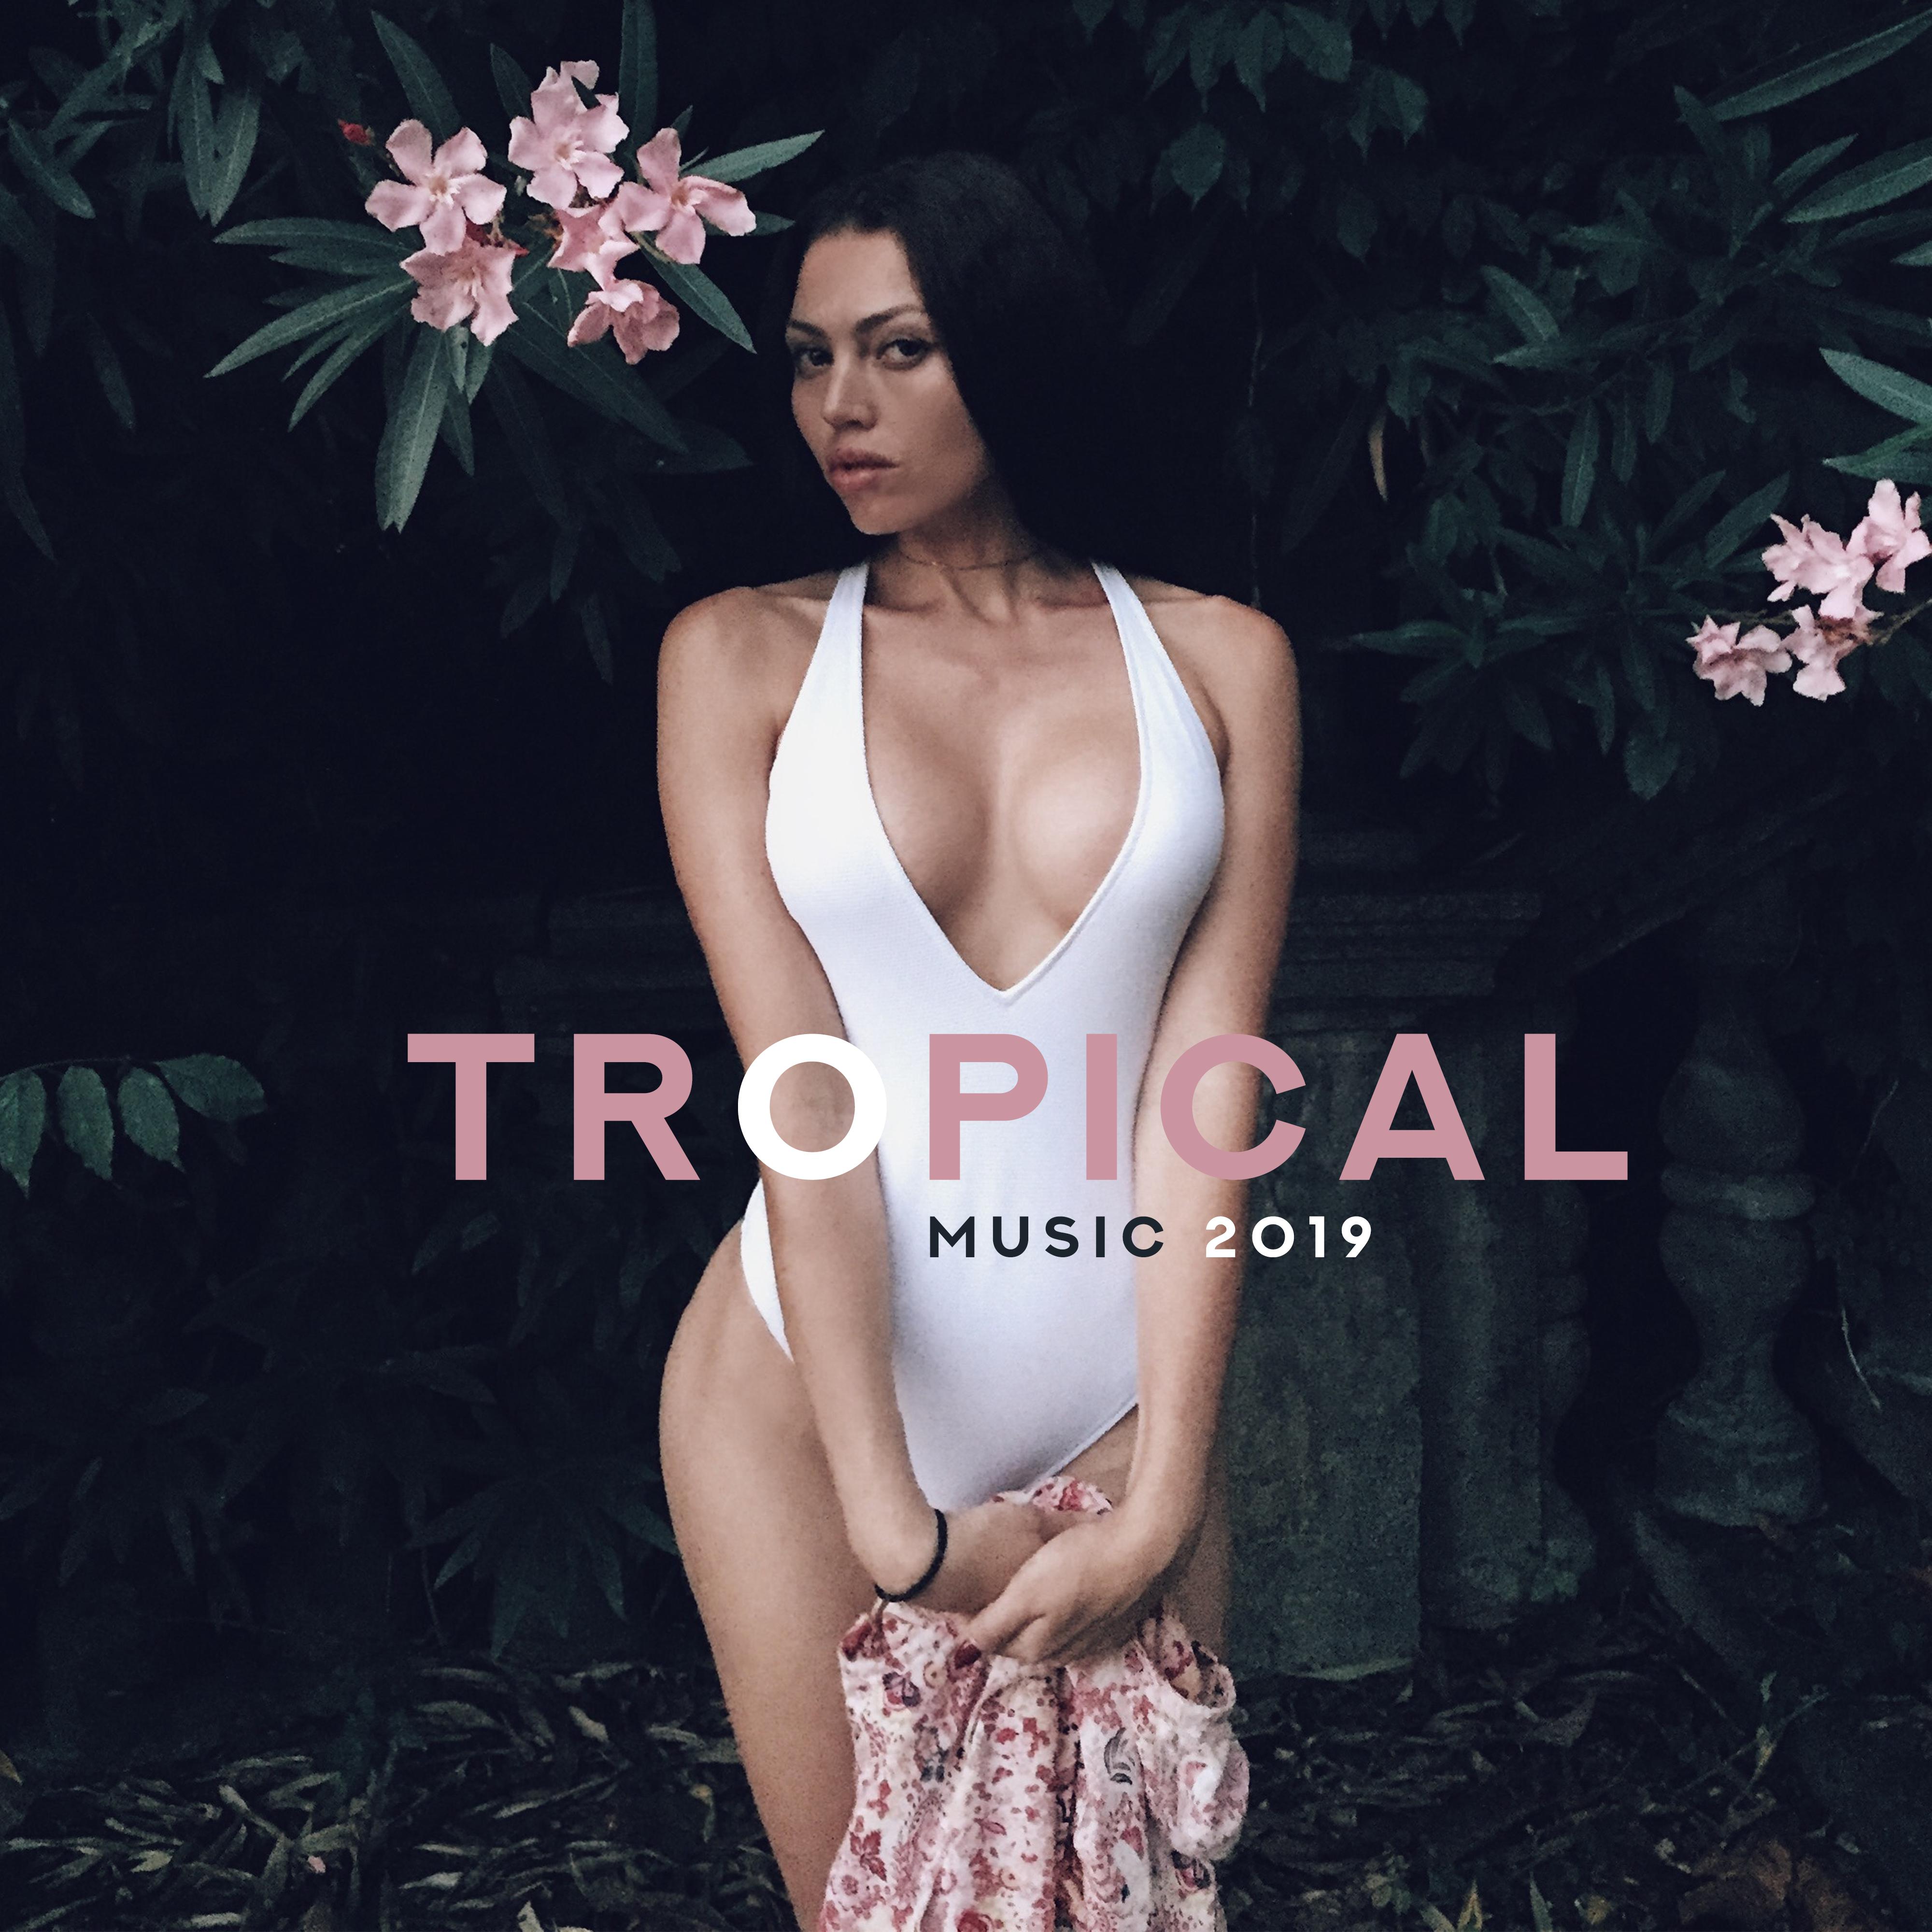 Tropical Music 2019  Ibiza Chill Out, Lounge Chillout Beats, Summer Music, Beach Music, Essential Ibiza Melodies, Zen, Ambient Chillout